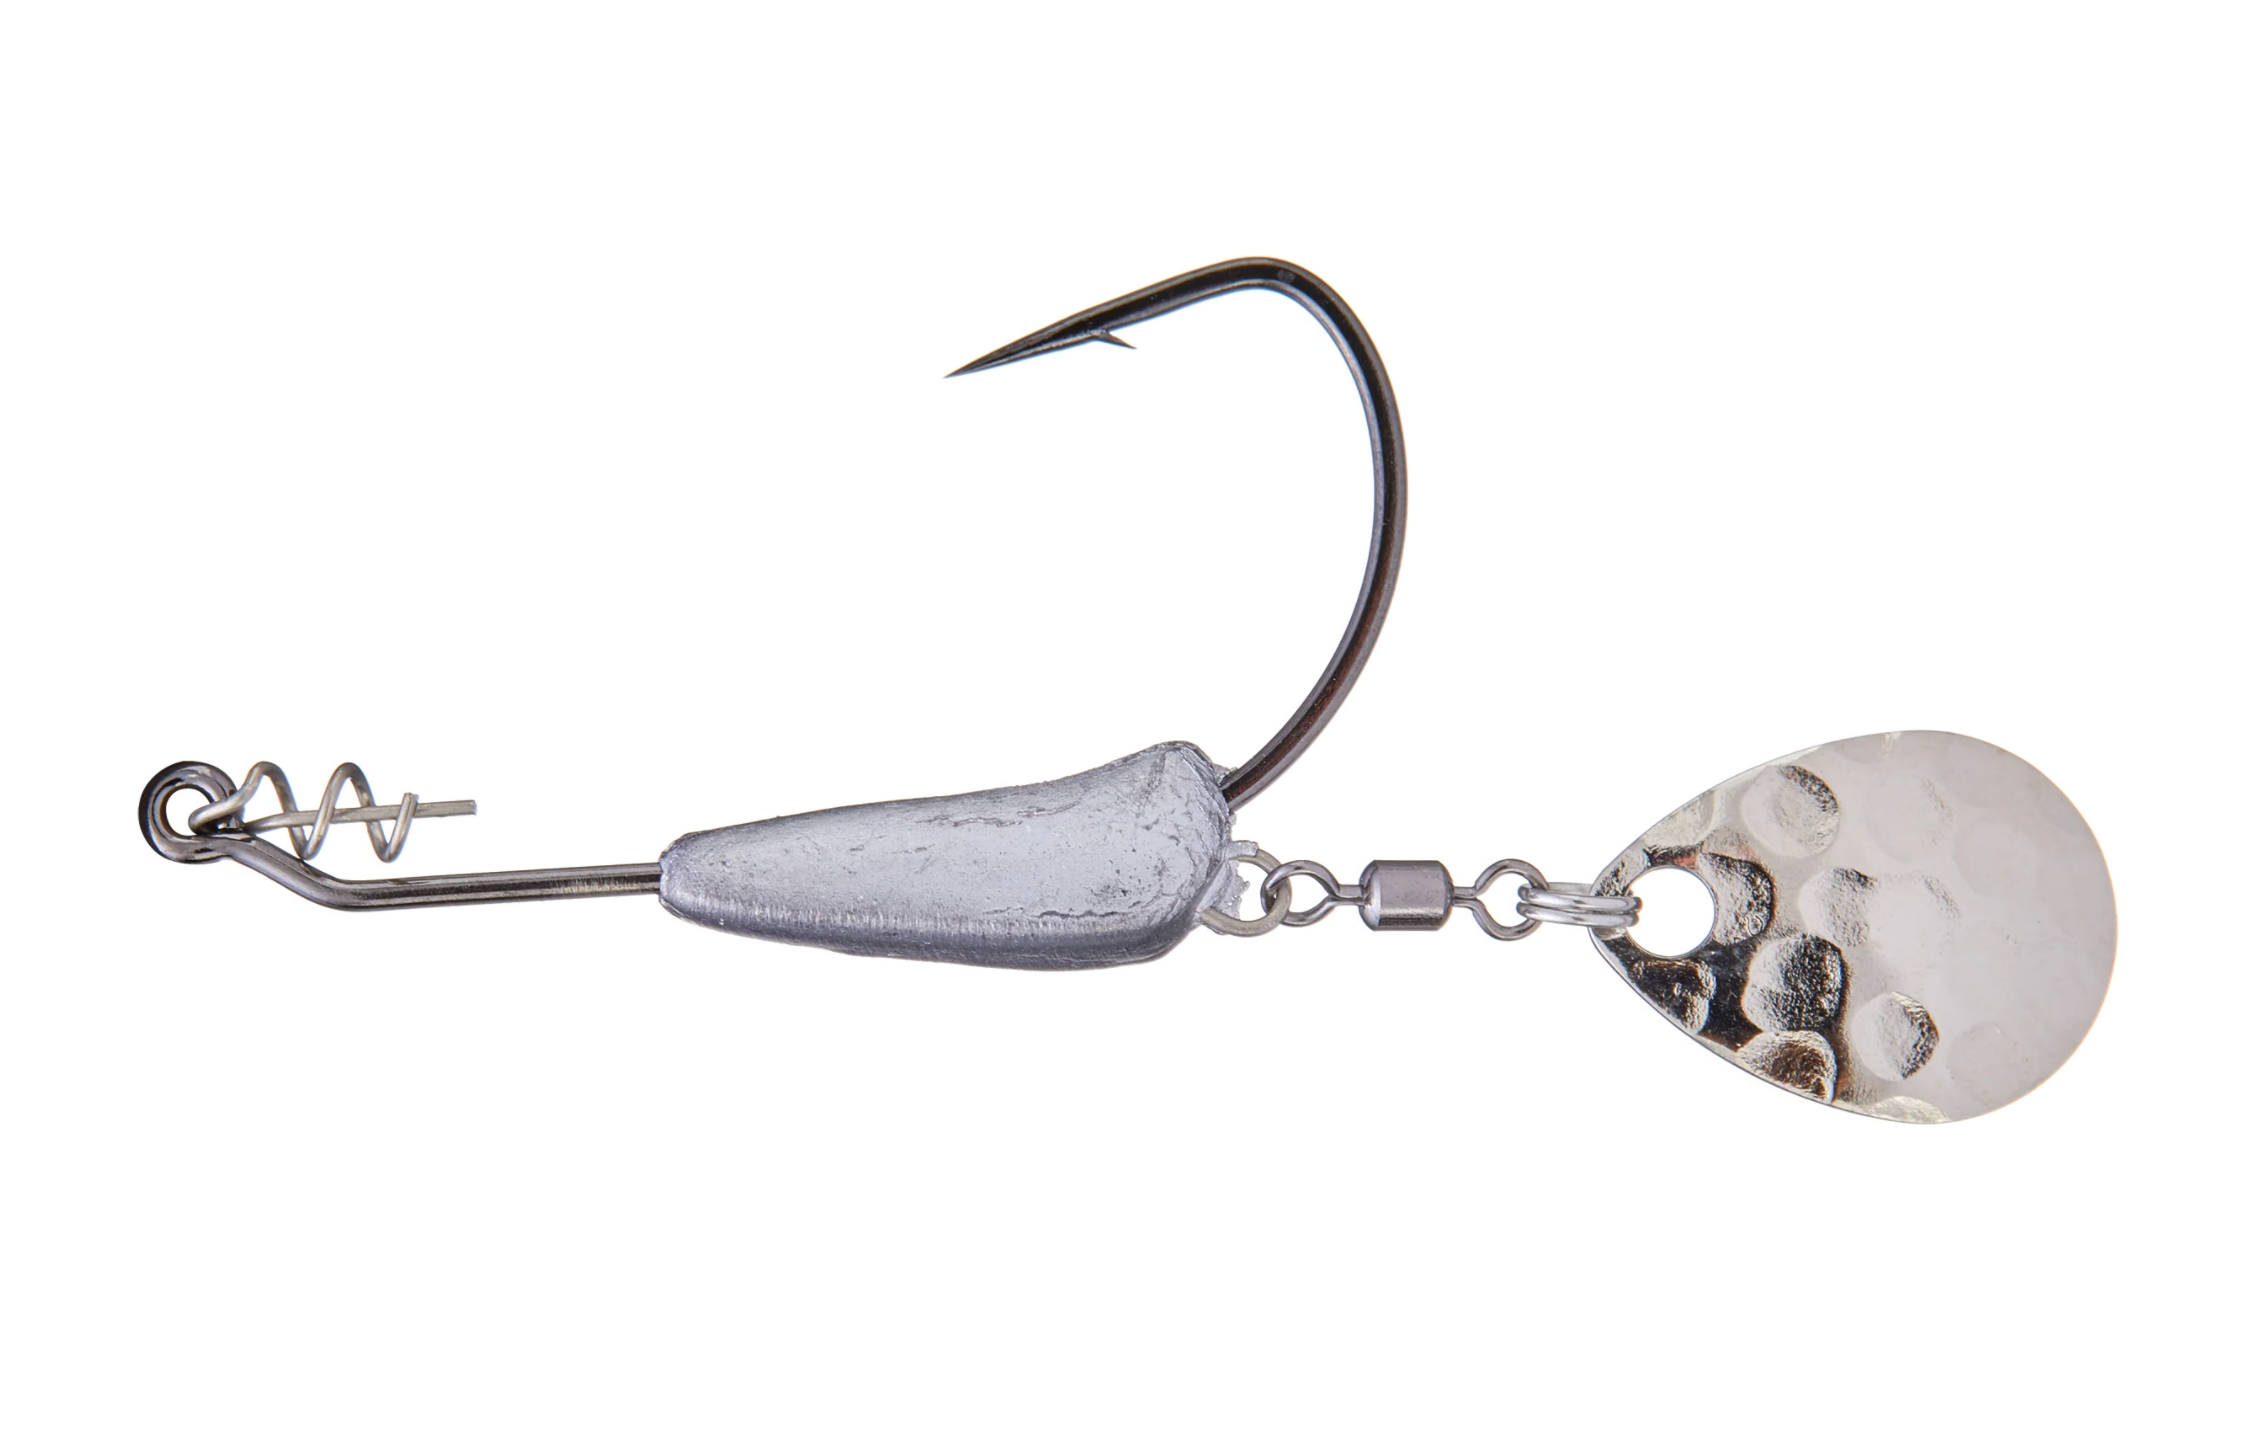 The Perfect Jig Tungsten Underspin – Canadian Tackle Store